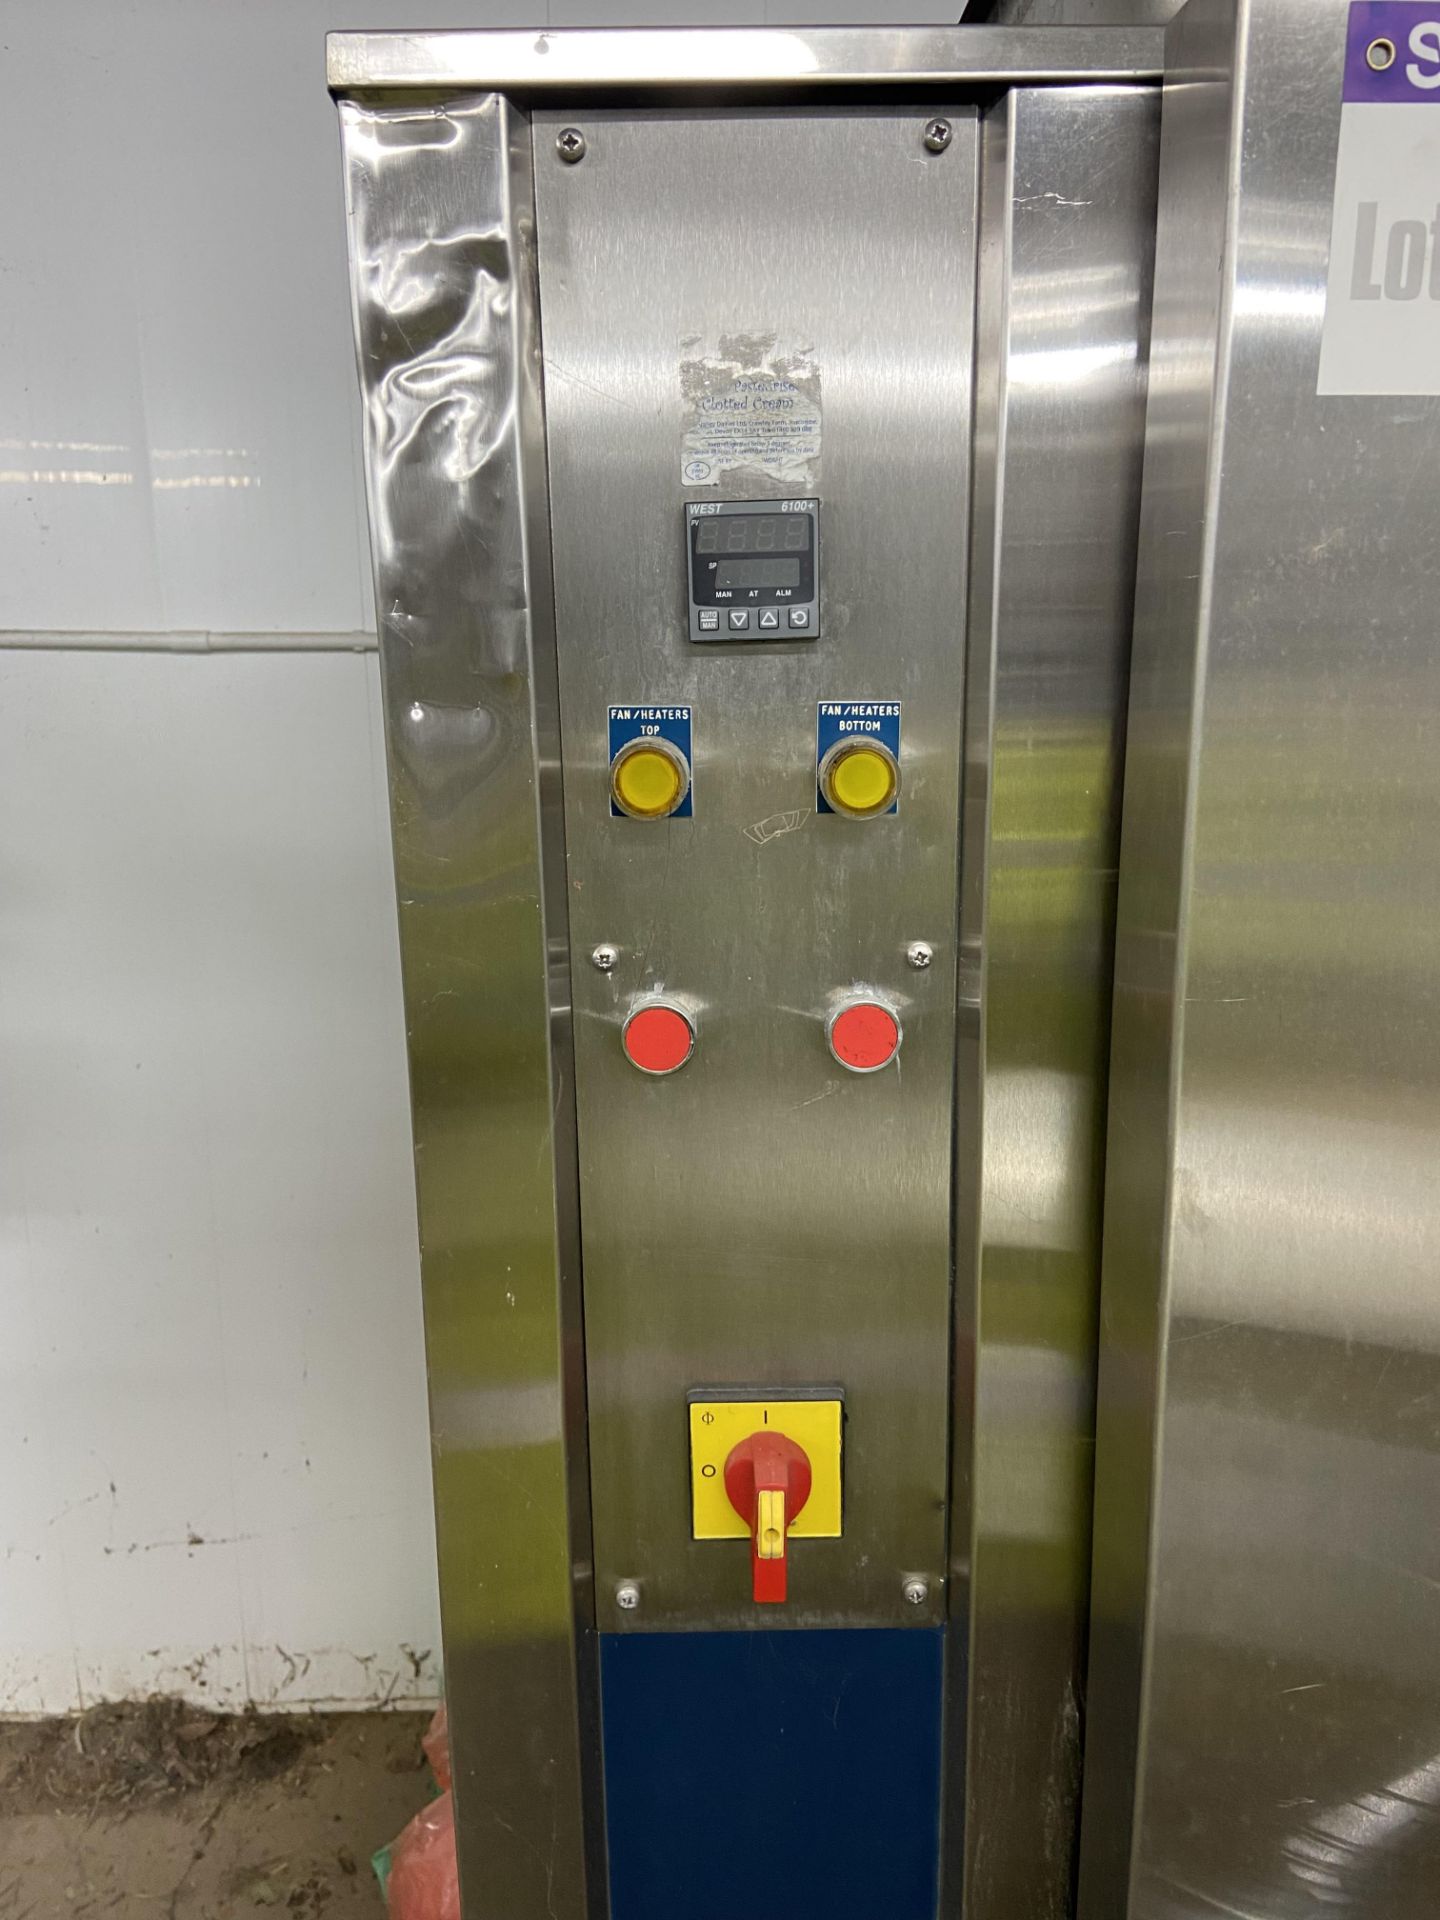 Rational CD201 CLOTTED CREAM HEATER/ OVEN, with multi-tray mobile rack, serial no. 20192031103, with - Image 2 of 7